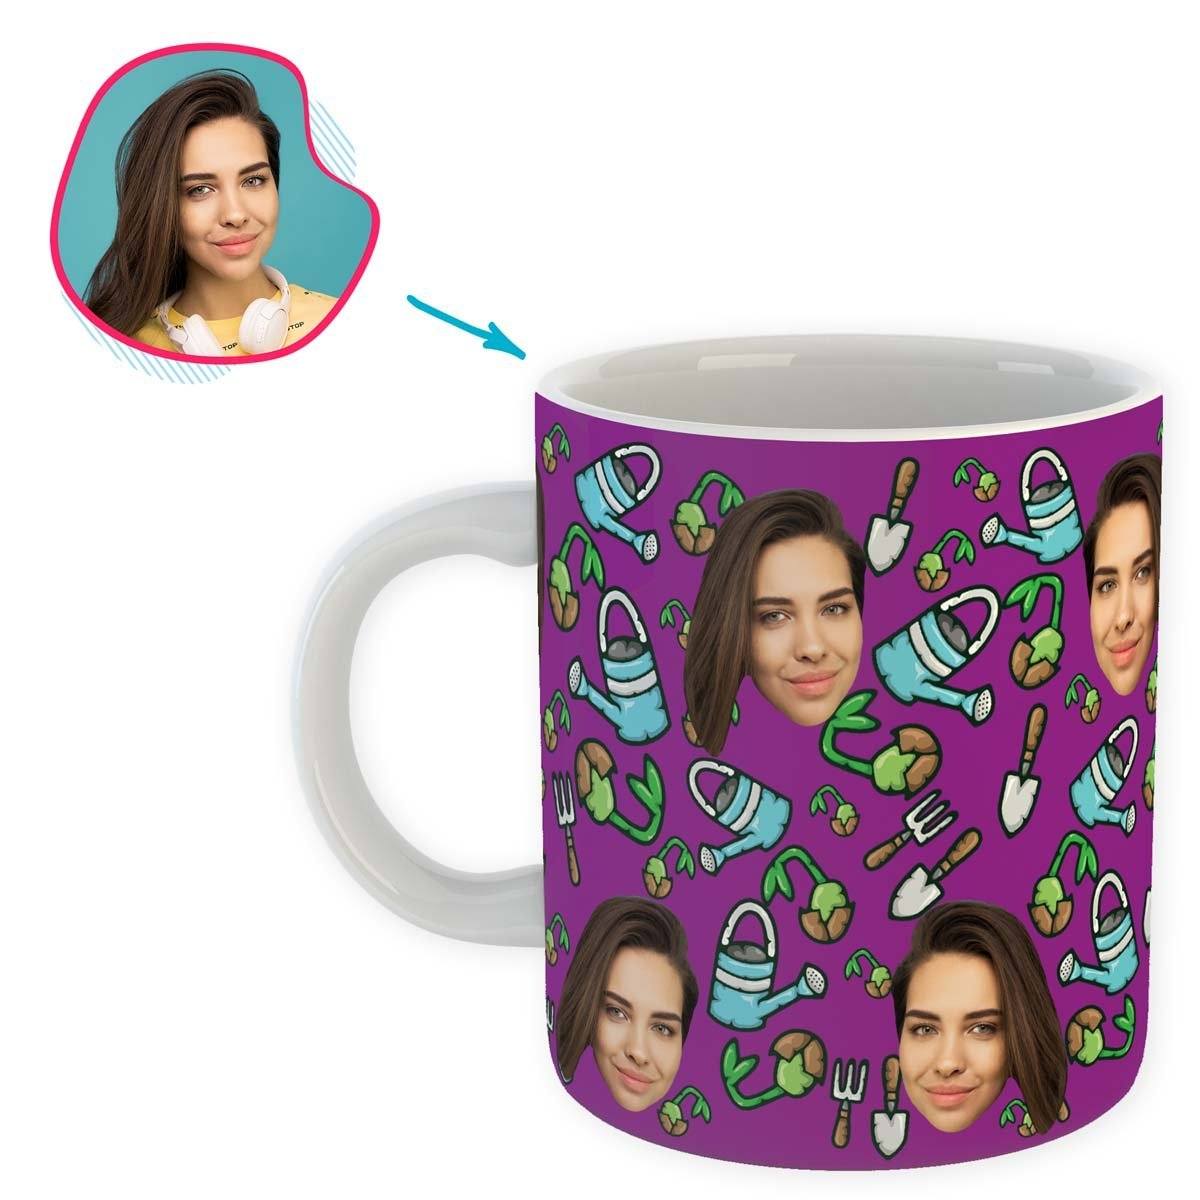 purple Gardening mug personalized with photo of face printed on it